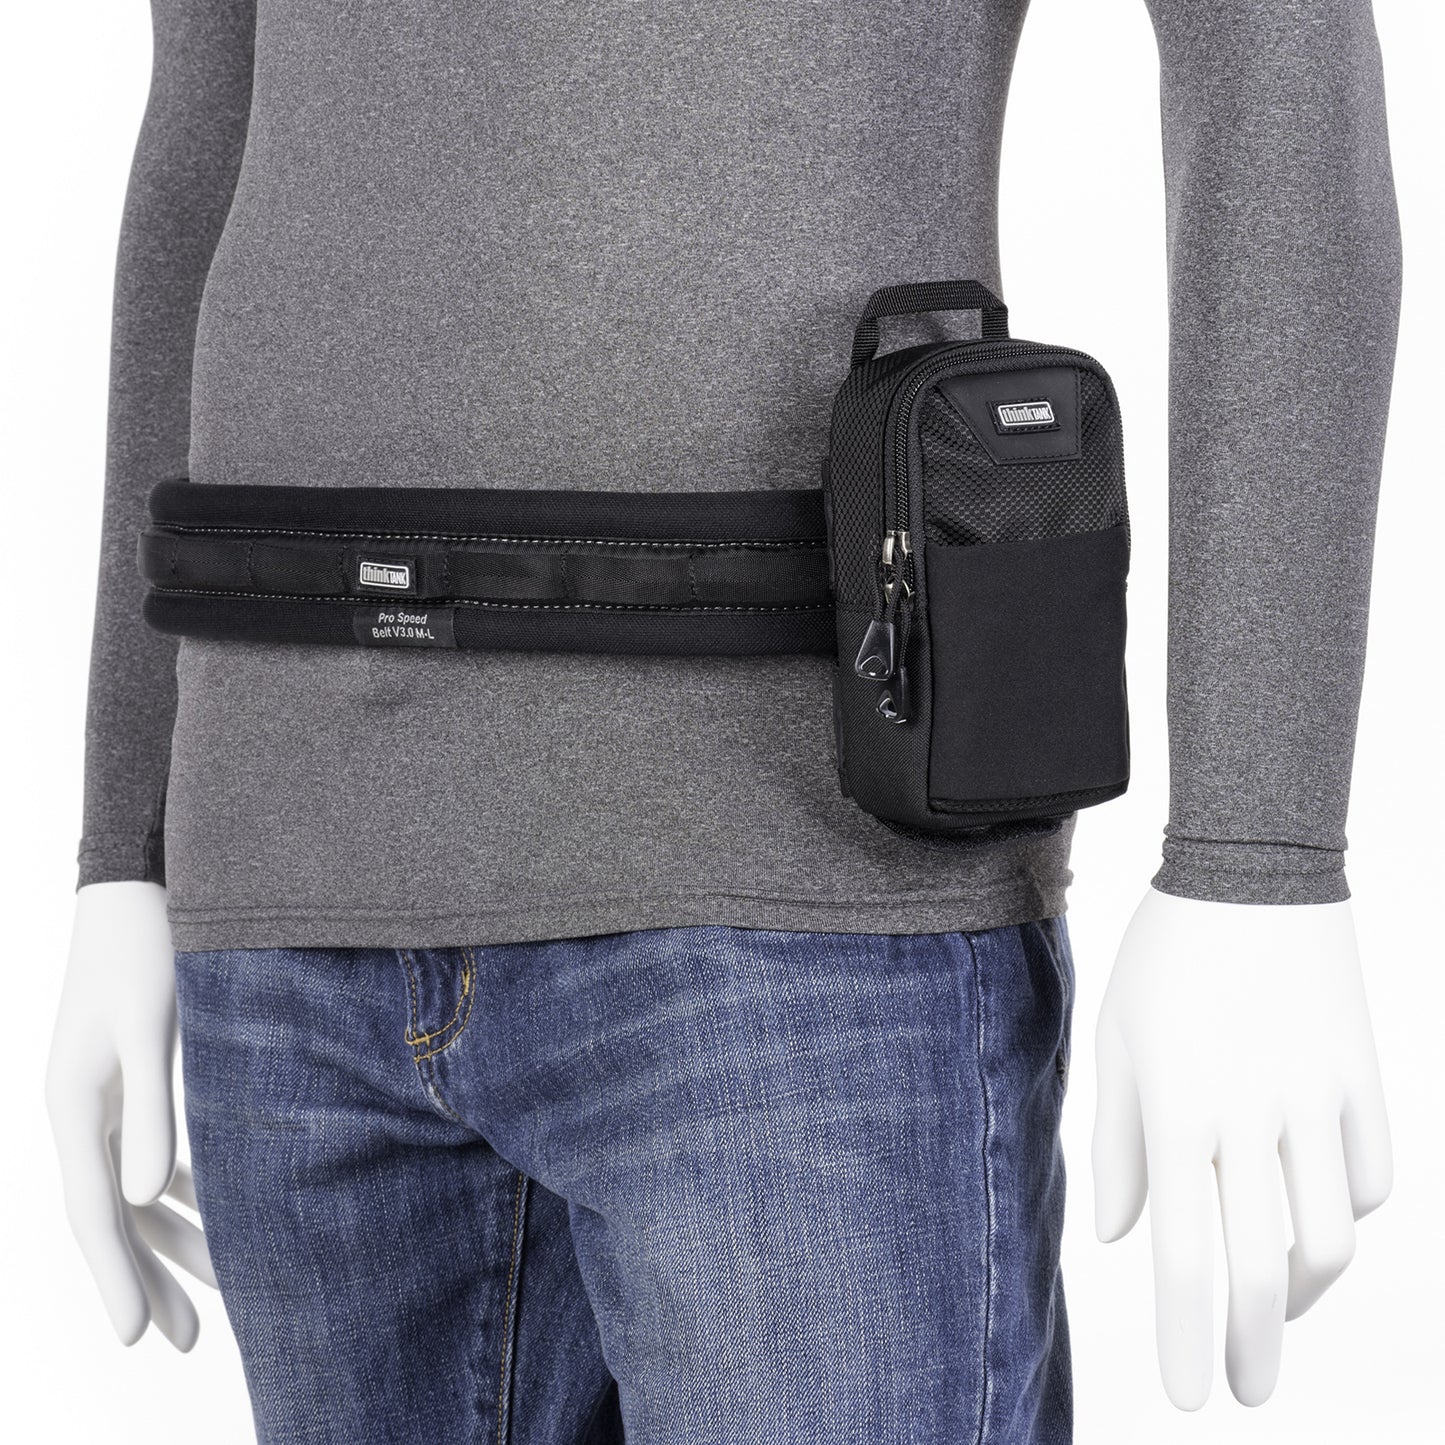 
                  
                    Pouch rotates or locks on a belt
                  
                